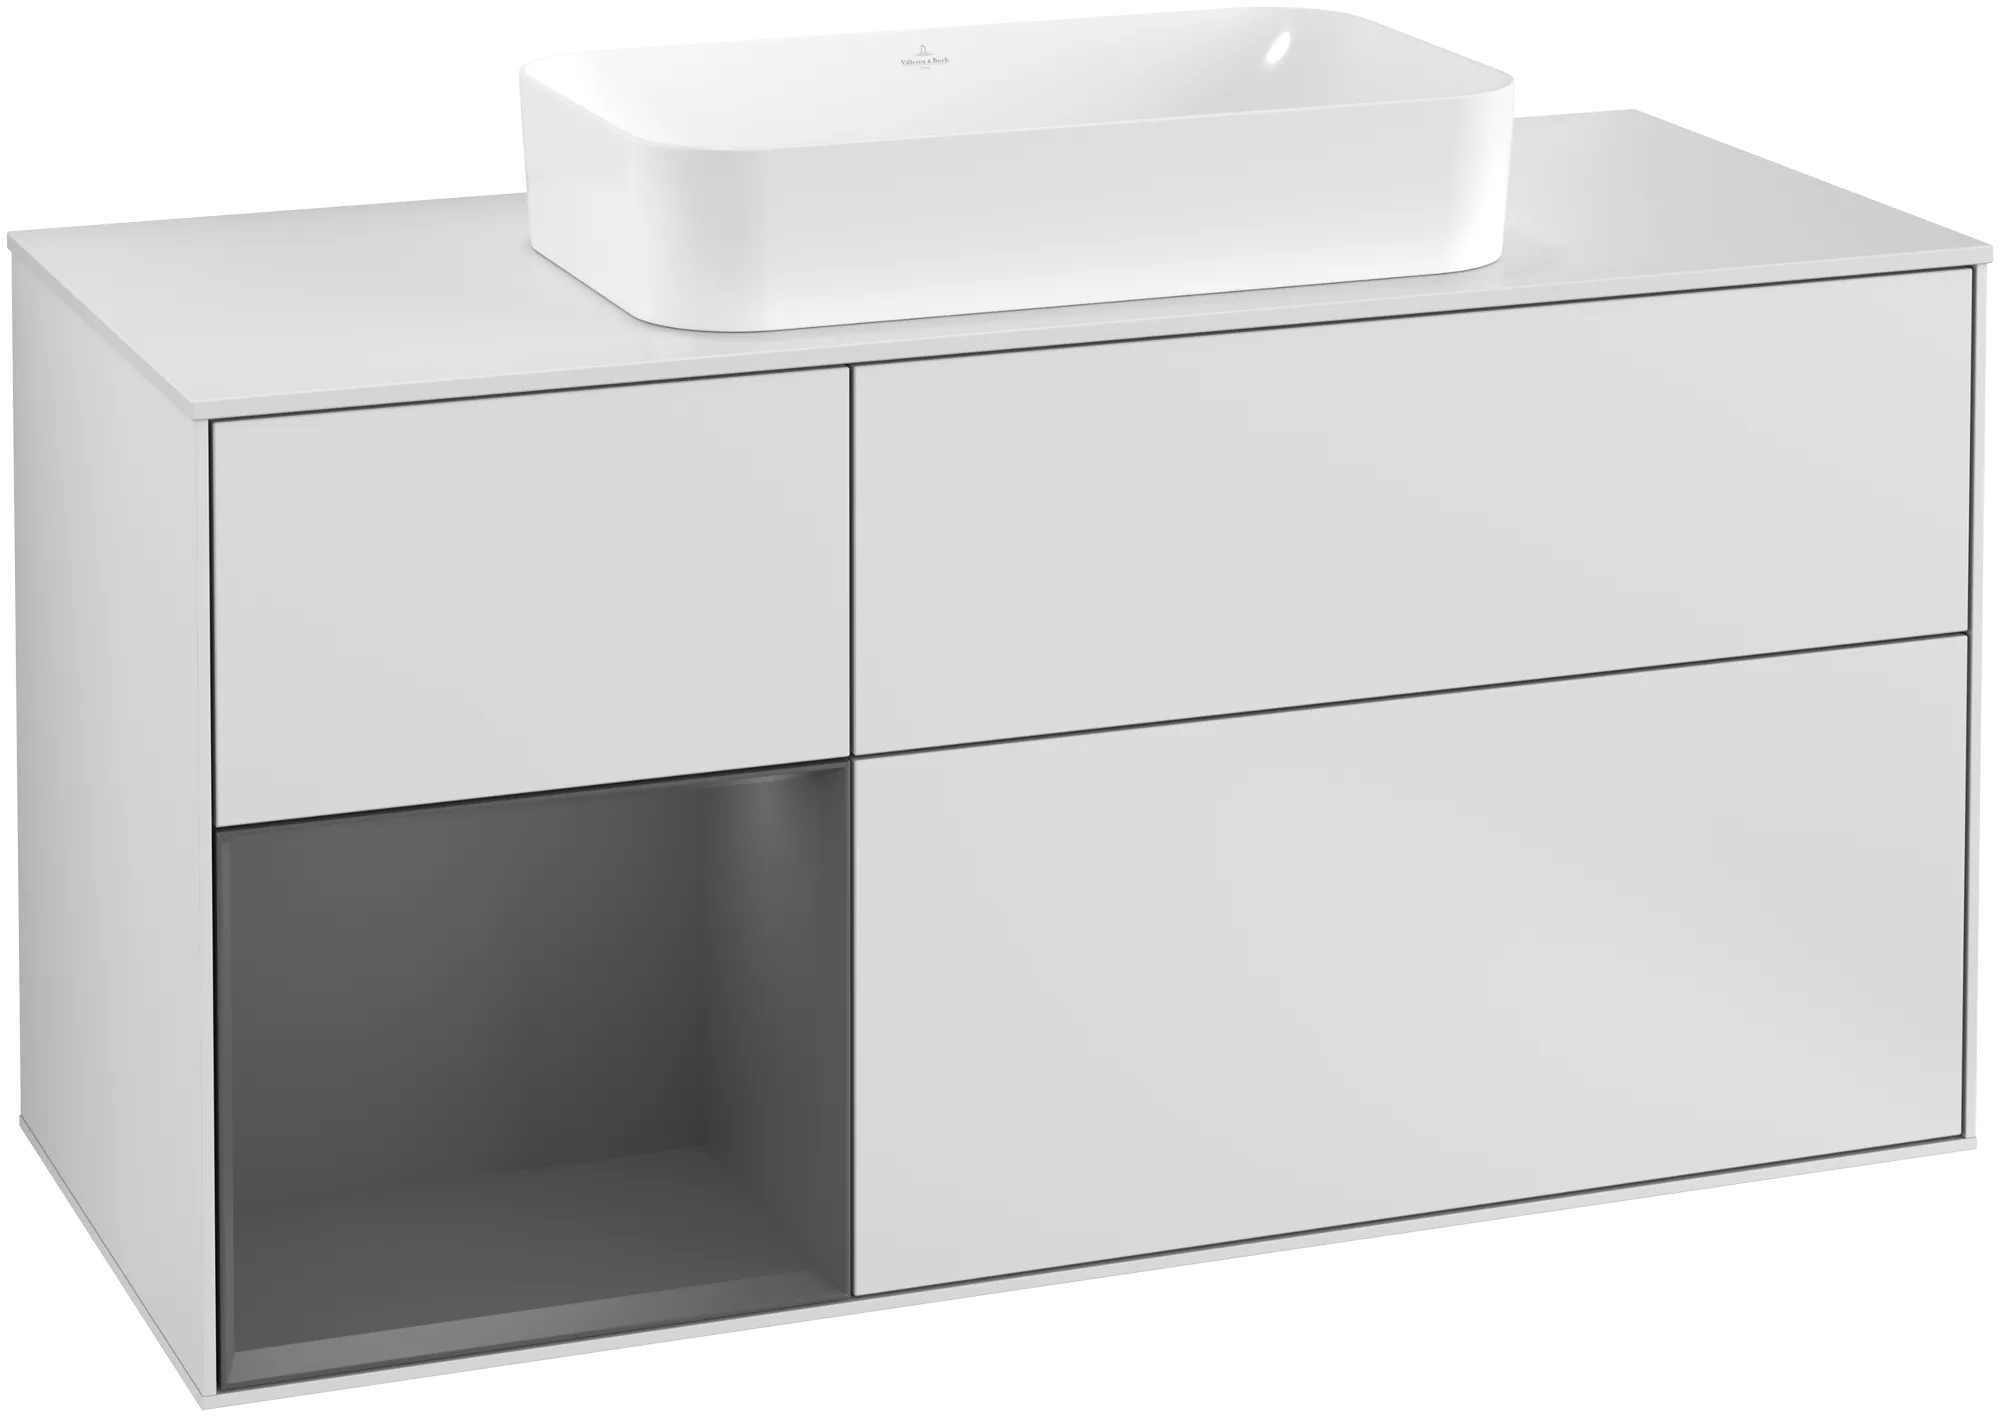 Picture of VILLEROY BOCH Finion Vanity unit, with lighting, 3 pull-out compartments, 1200 x 603 x 501 mm, White Matt Lacquer / Anthracite Matt Lacquer / Glass White Matt #G291GKMT